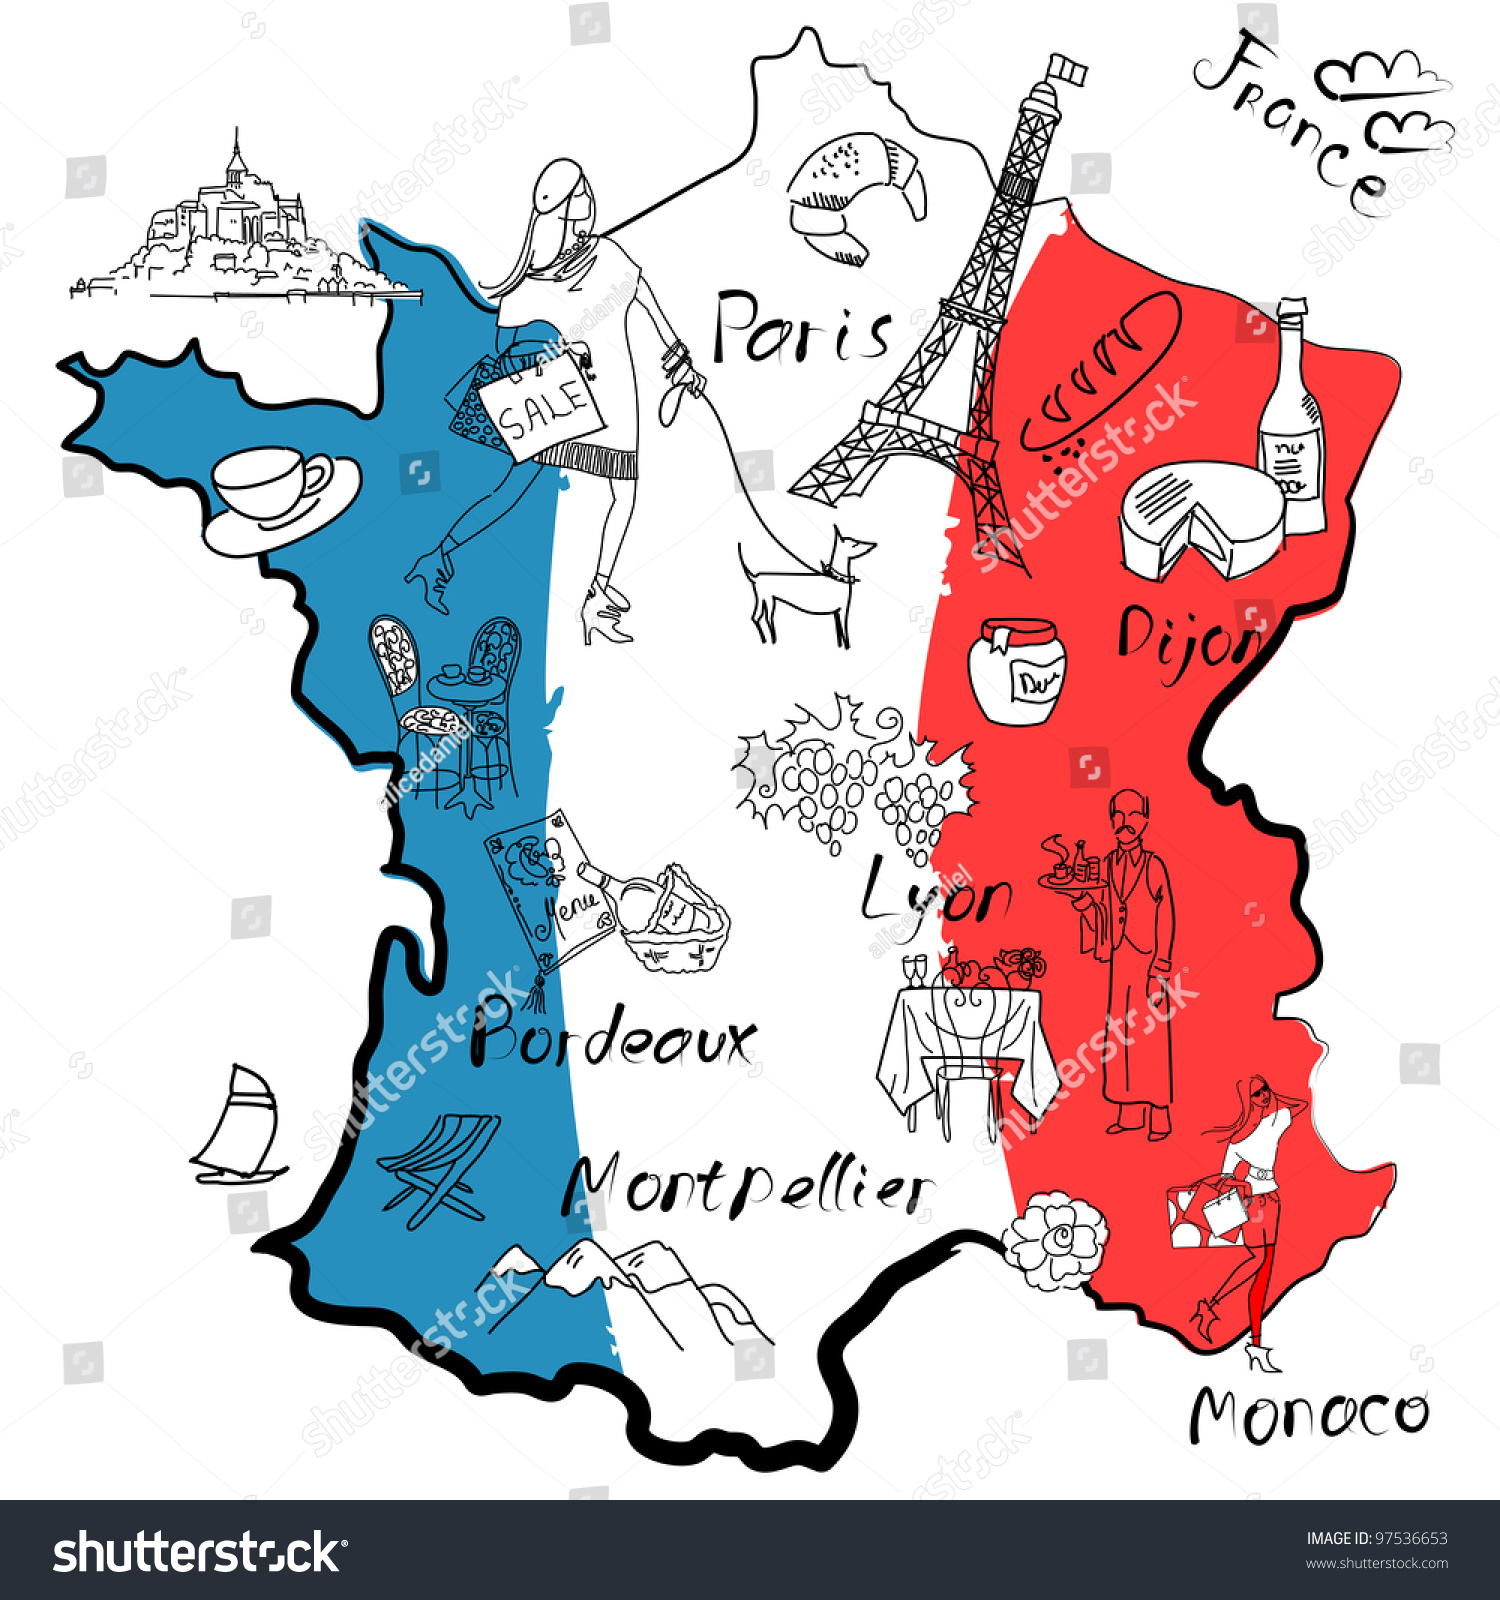 stock-vector-stylized-map-of-france-things-that-different-regions-in-france-are-famous-for-97536653.jpg